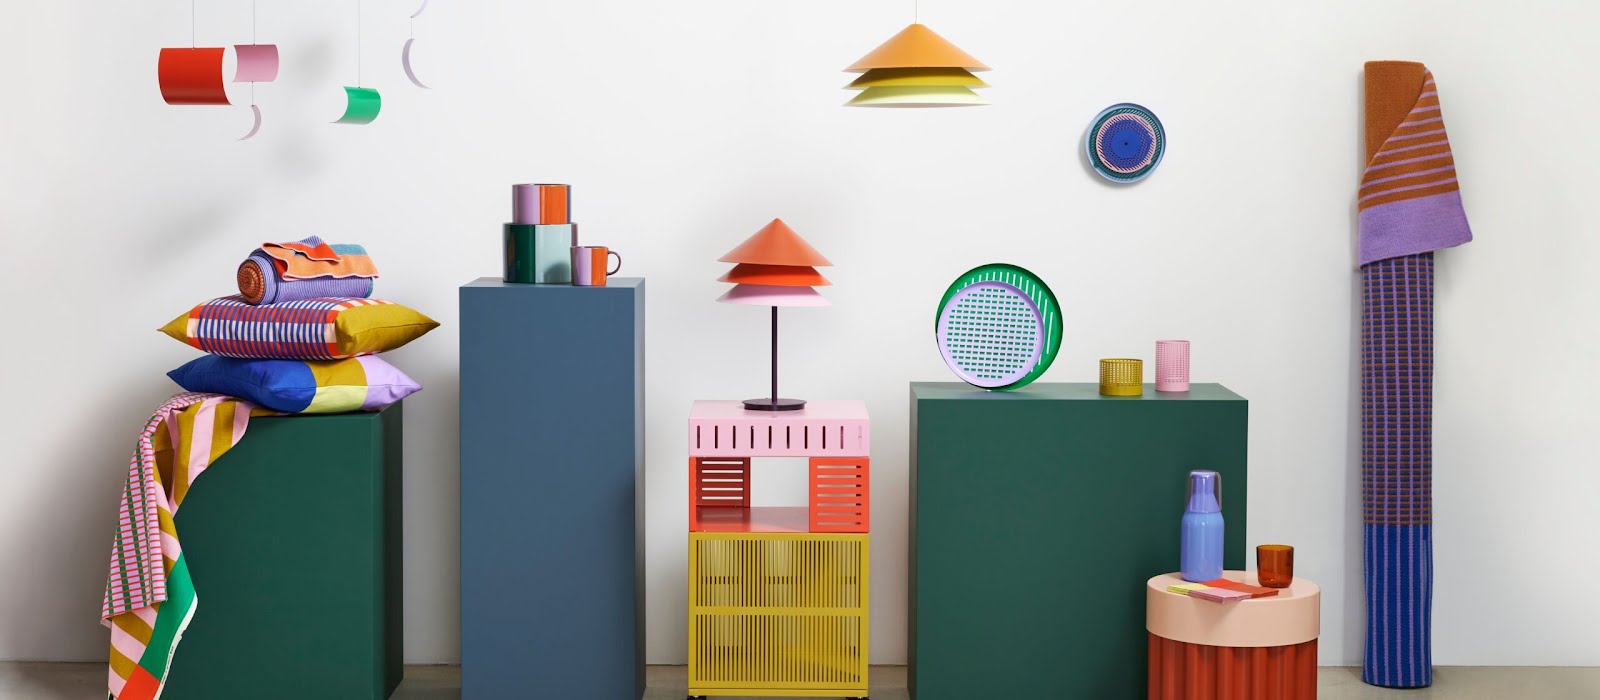 Ikea has announced a collection that celebrates the power of colour